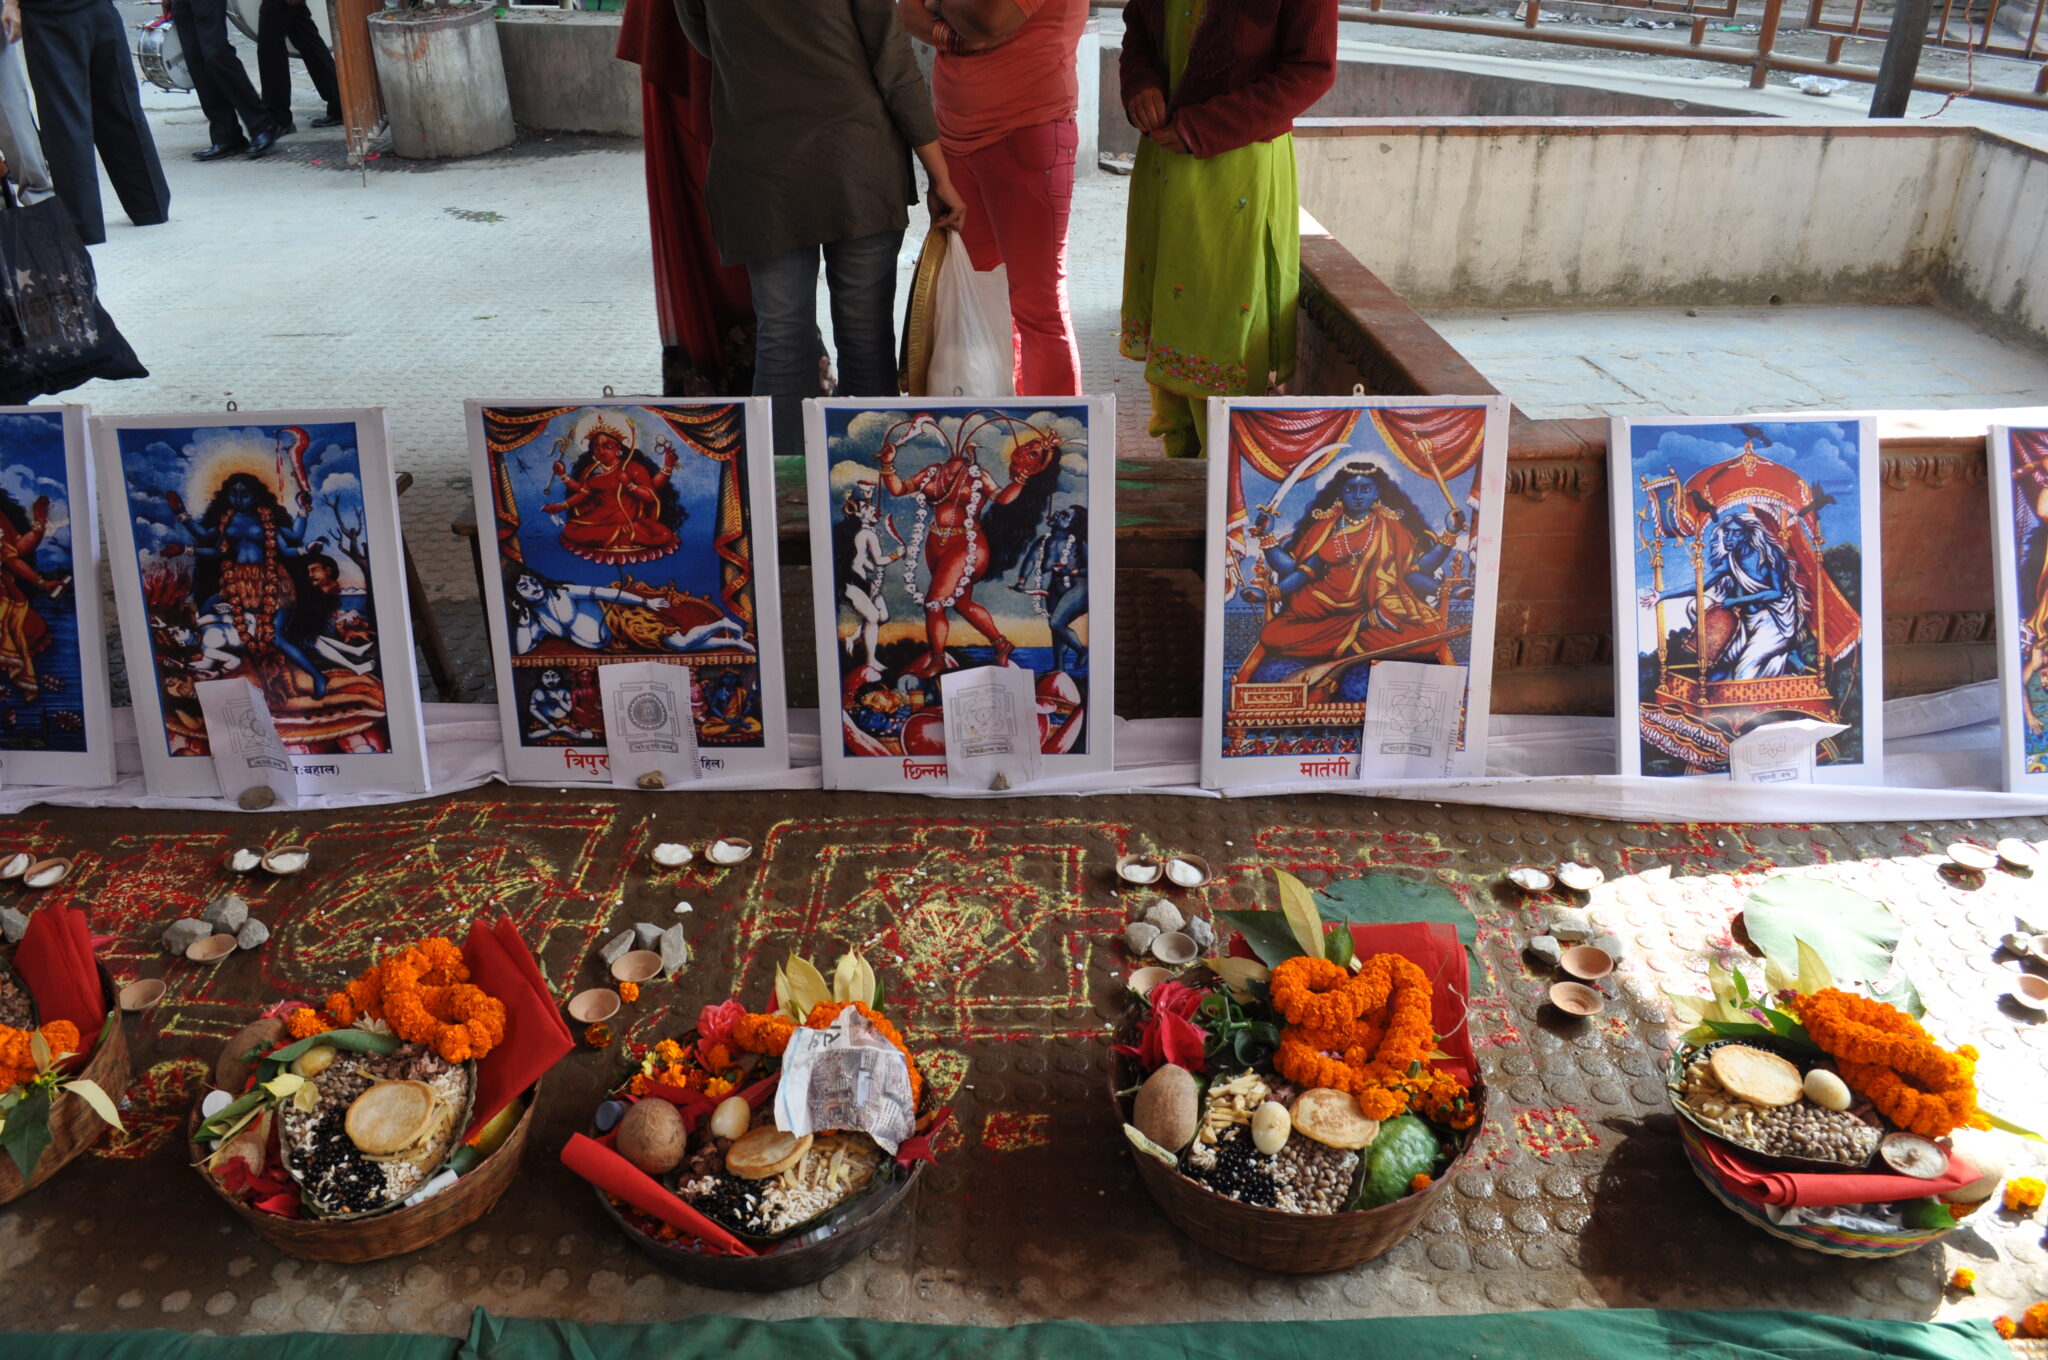 Arrangement of postcard-sized prints depicting deities before bowls brimming with offerings atop embroidered textile